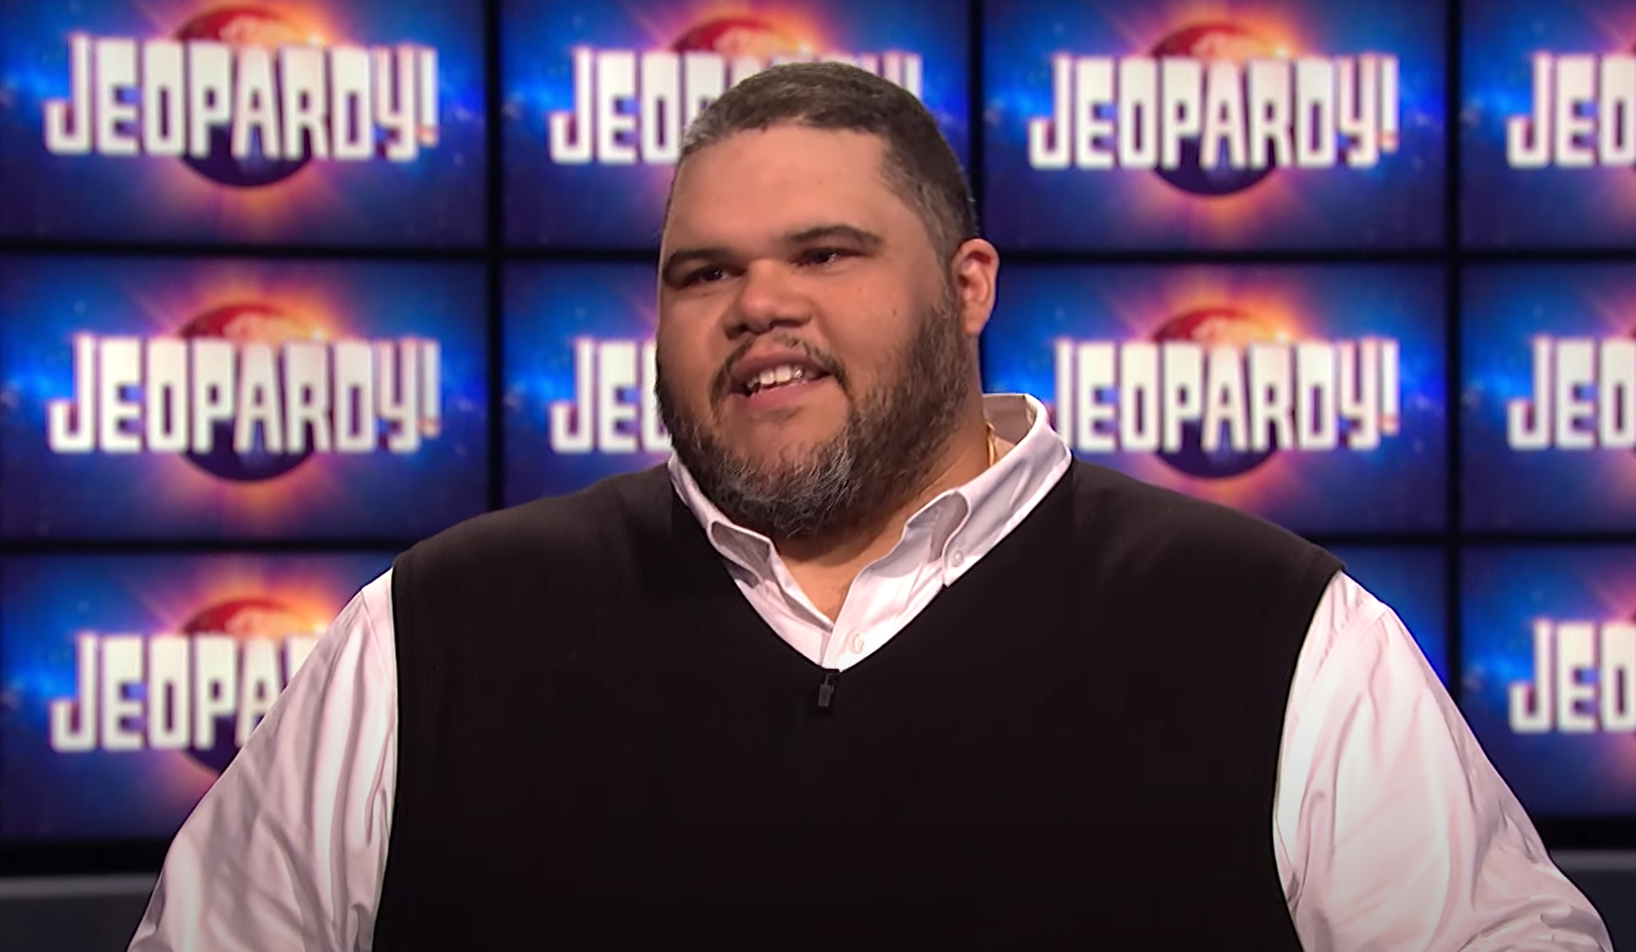 ‘Jeopardy!’: Ryan Long Pens Moving Essay on His Journey Prior to Game Show Fame